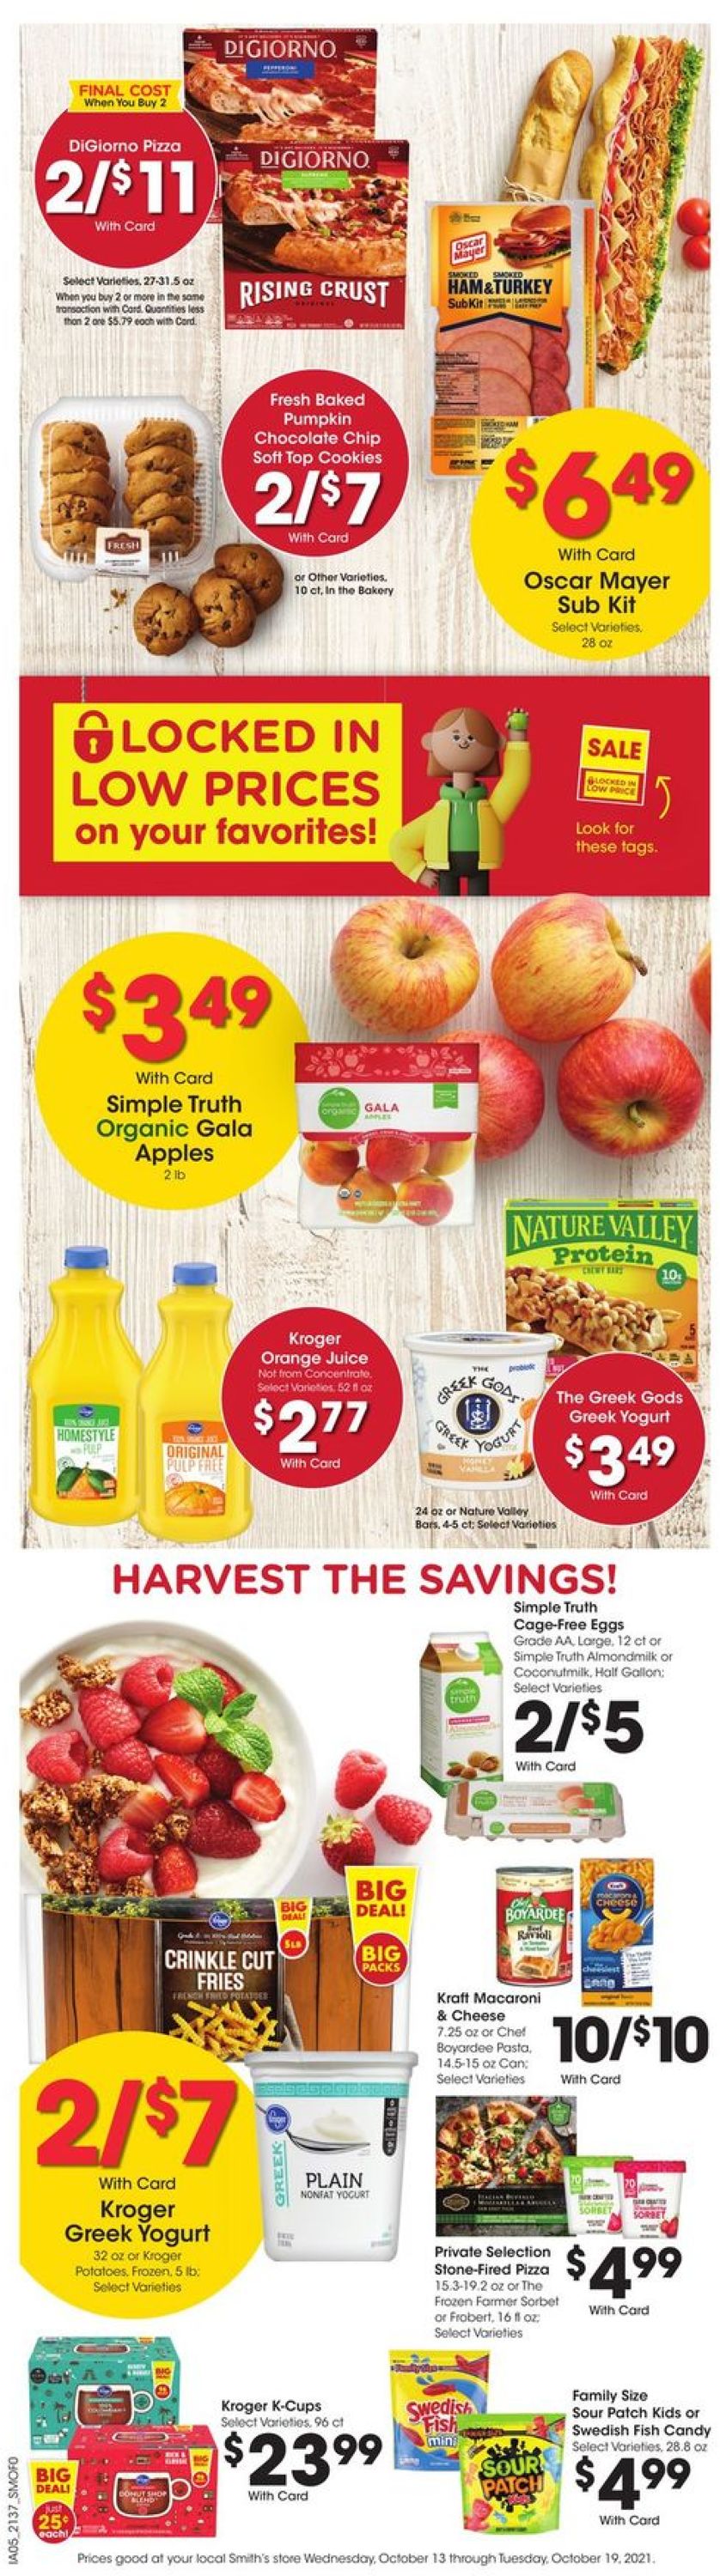 Smith's Ad from 10/13/2021